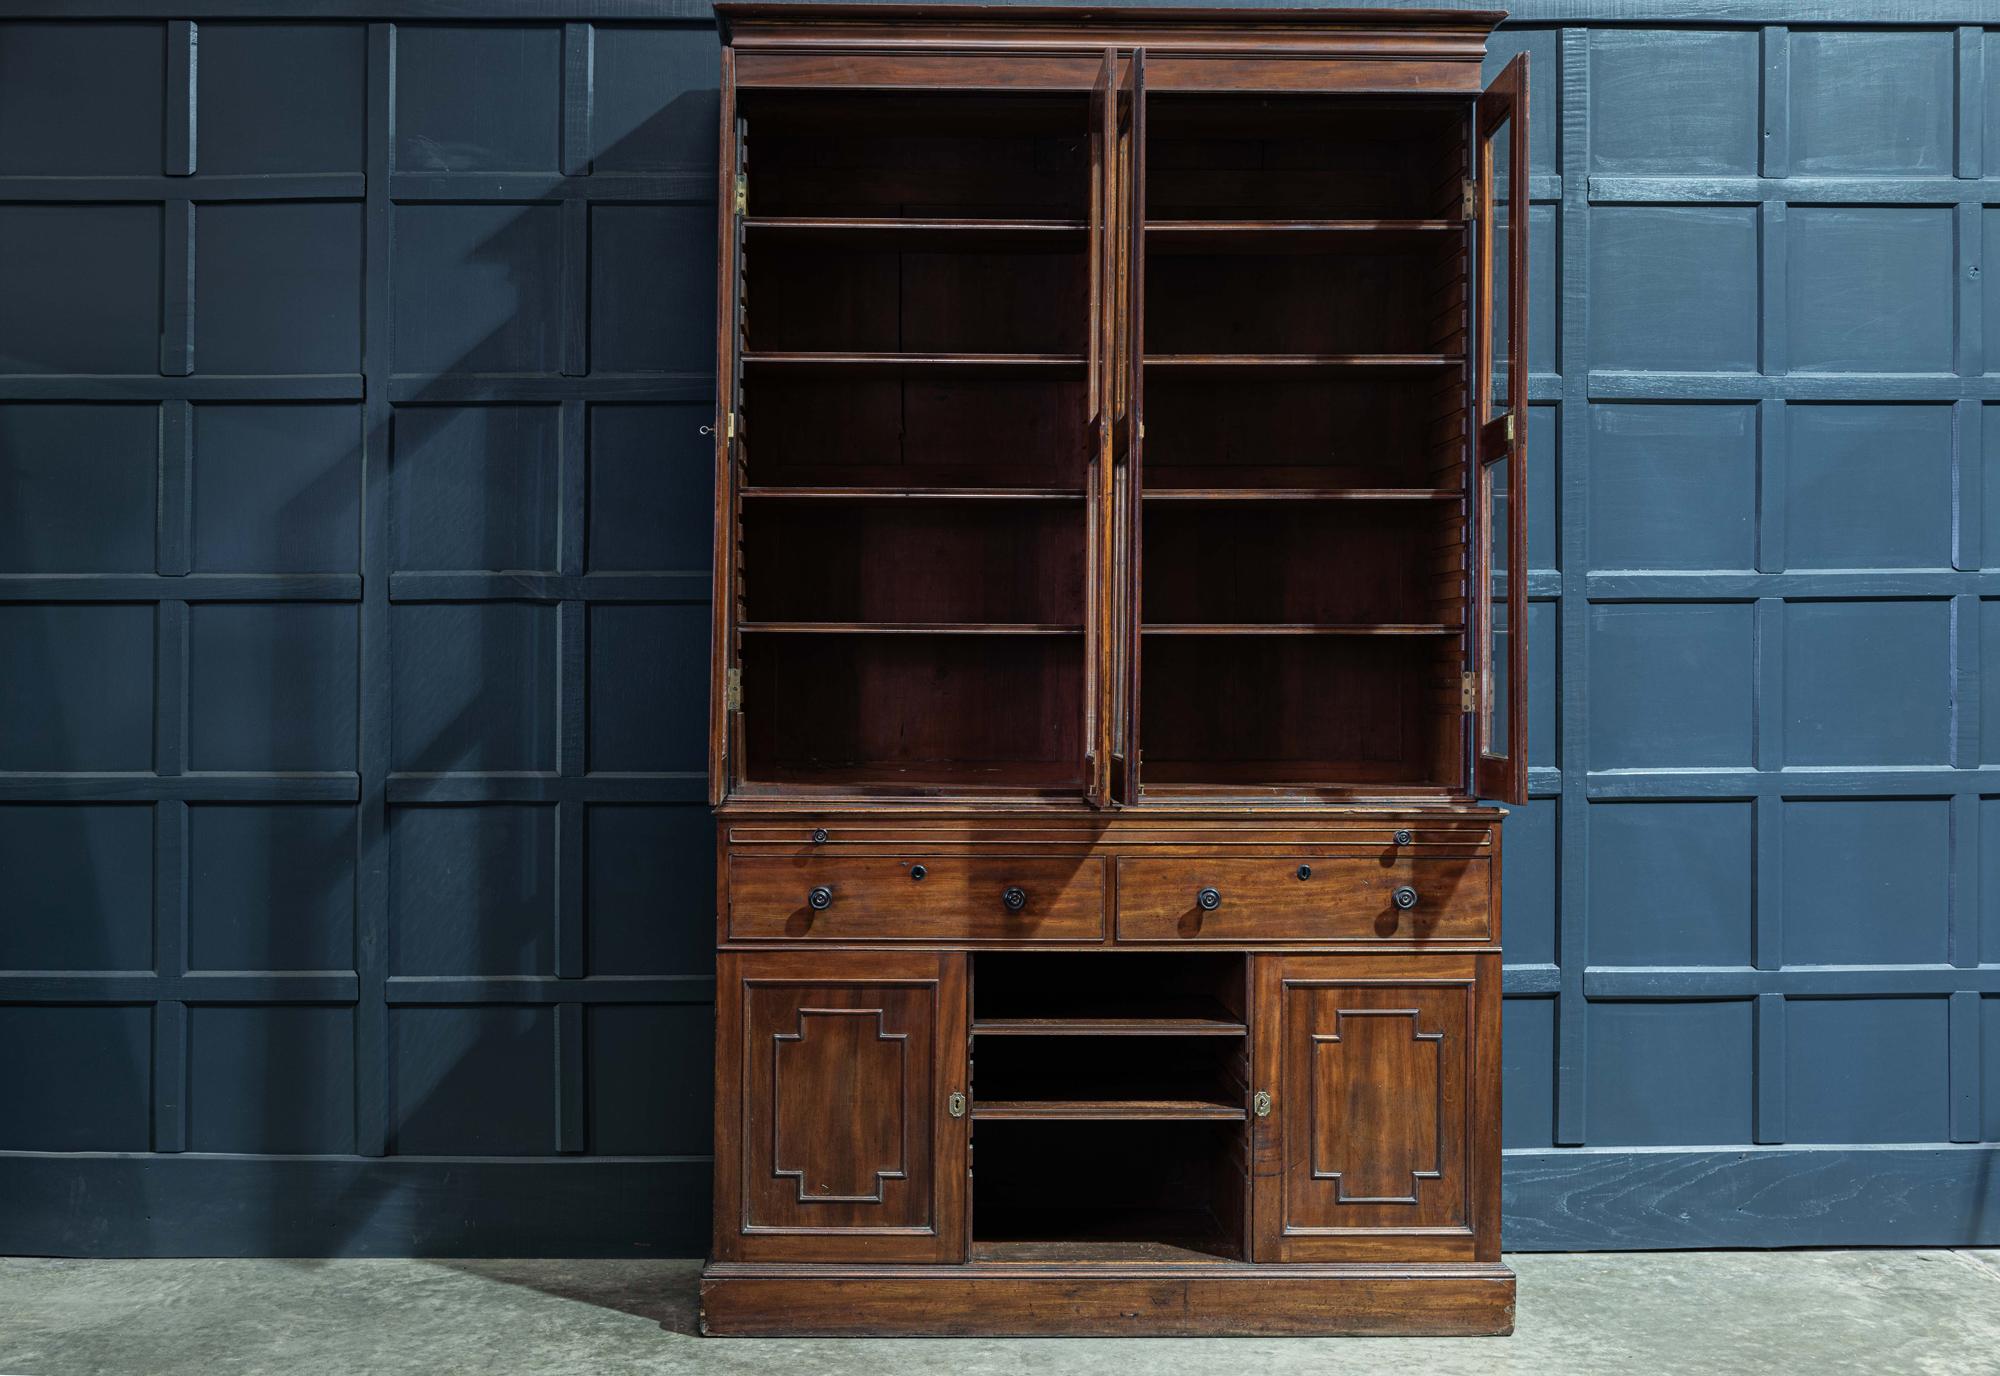 19th century English mahogany glazed secretaire bookcase
circa 1870.

19th century mahogany glazed secretaire bookcase with 4 glazed cabinet doors above a pull out mid section leather writing slide. With 2 large dovetailed drawers, adjustable